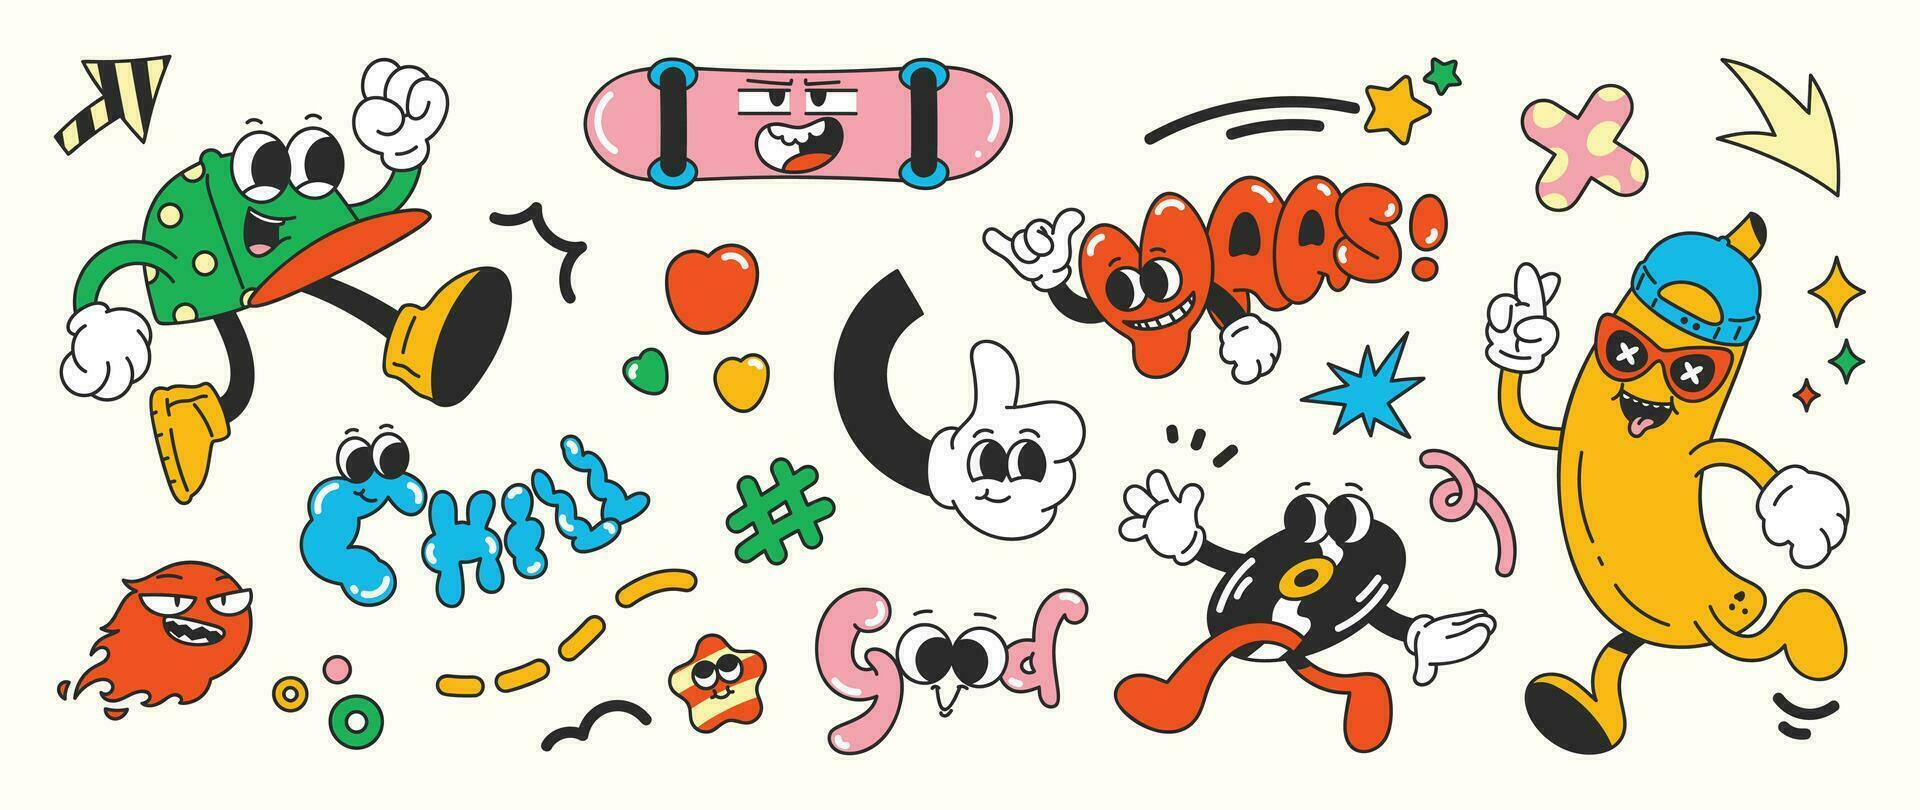 Set of 70s groovy element vector. Collection of cartoon characters, doodle smile face, platter, banana, skateboard, fire, heart, word. Cute retro groovy hippie design for decorative, sticker, kids. vector